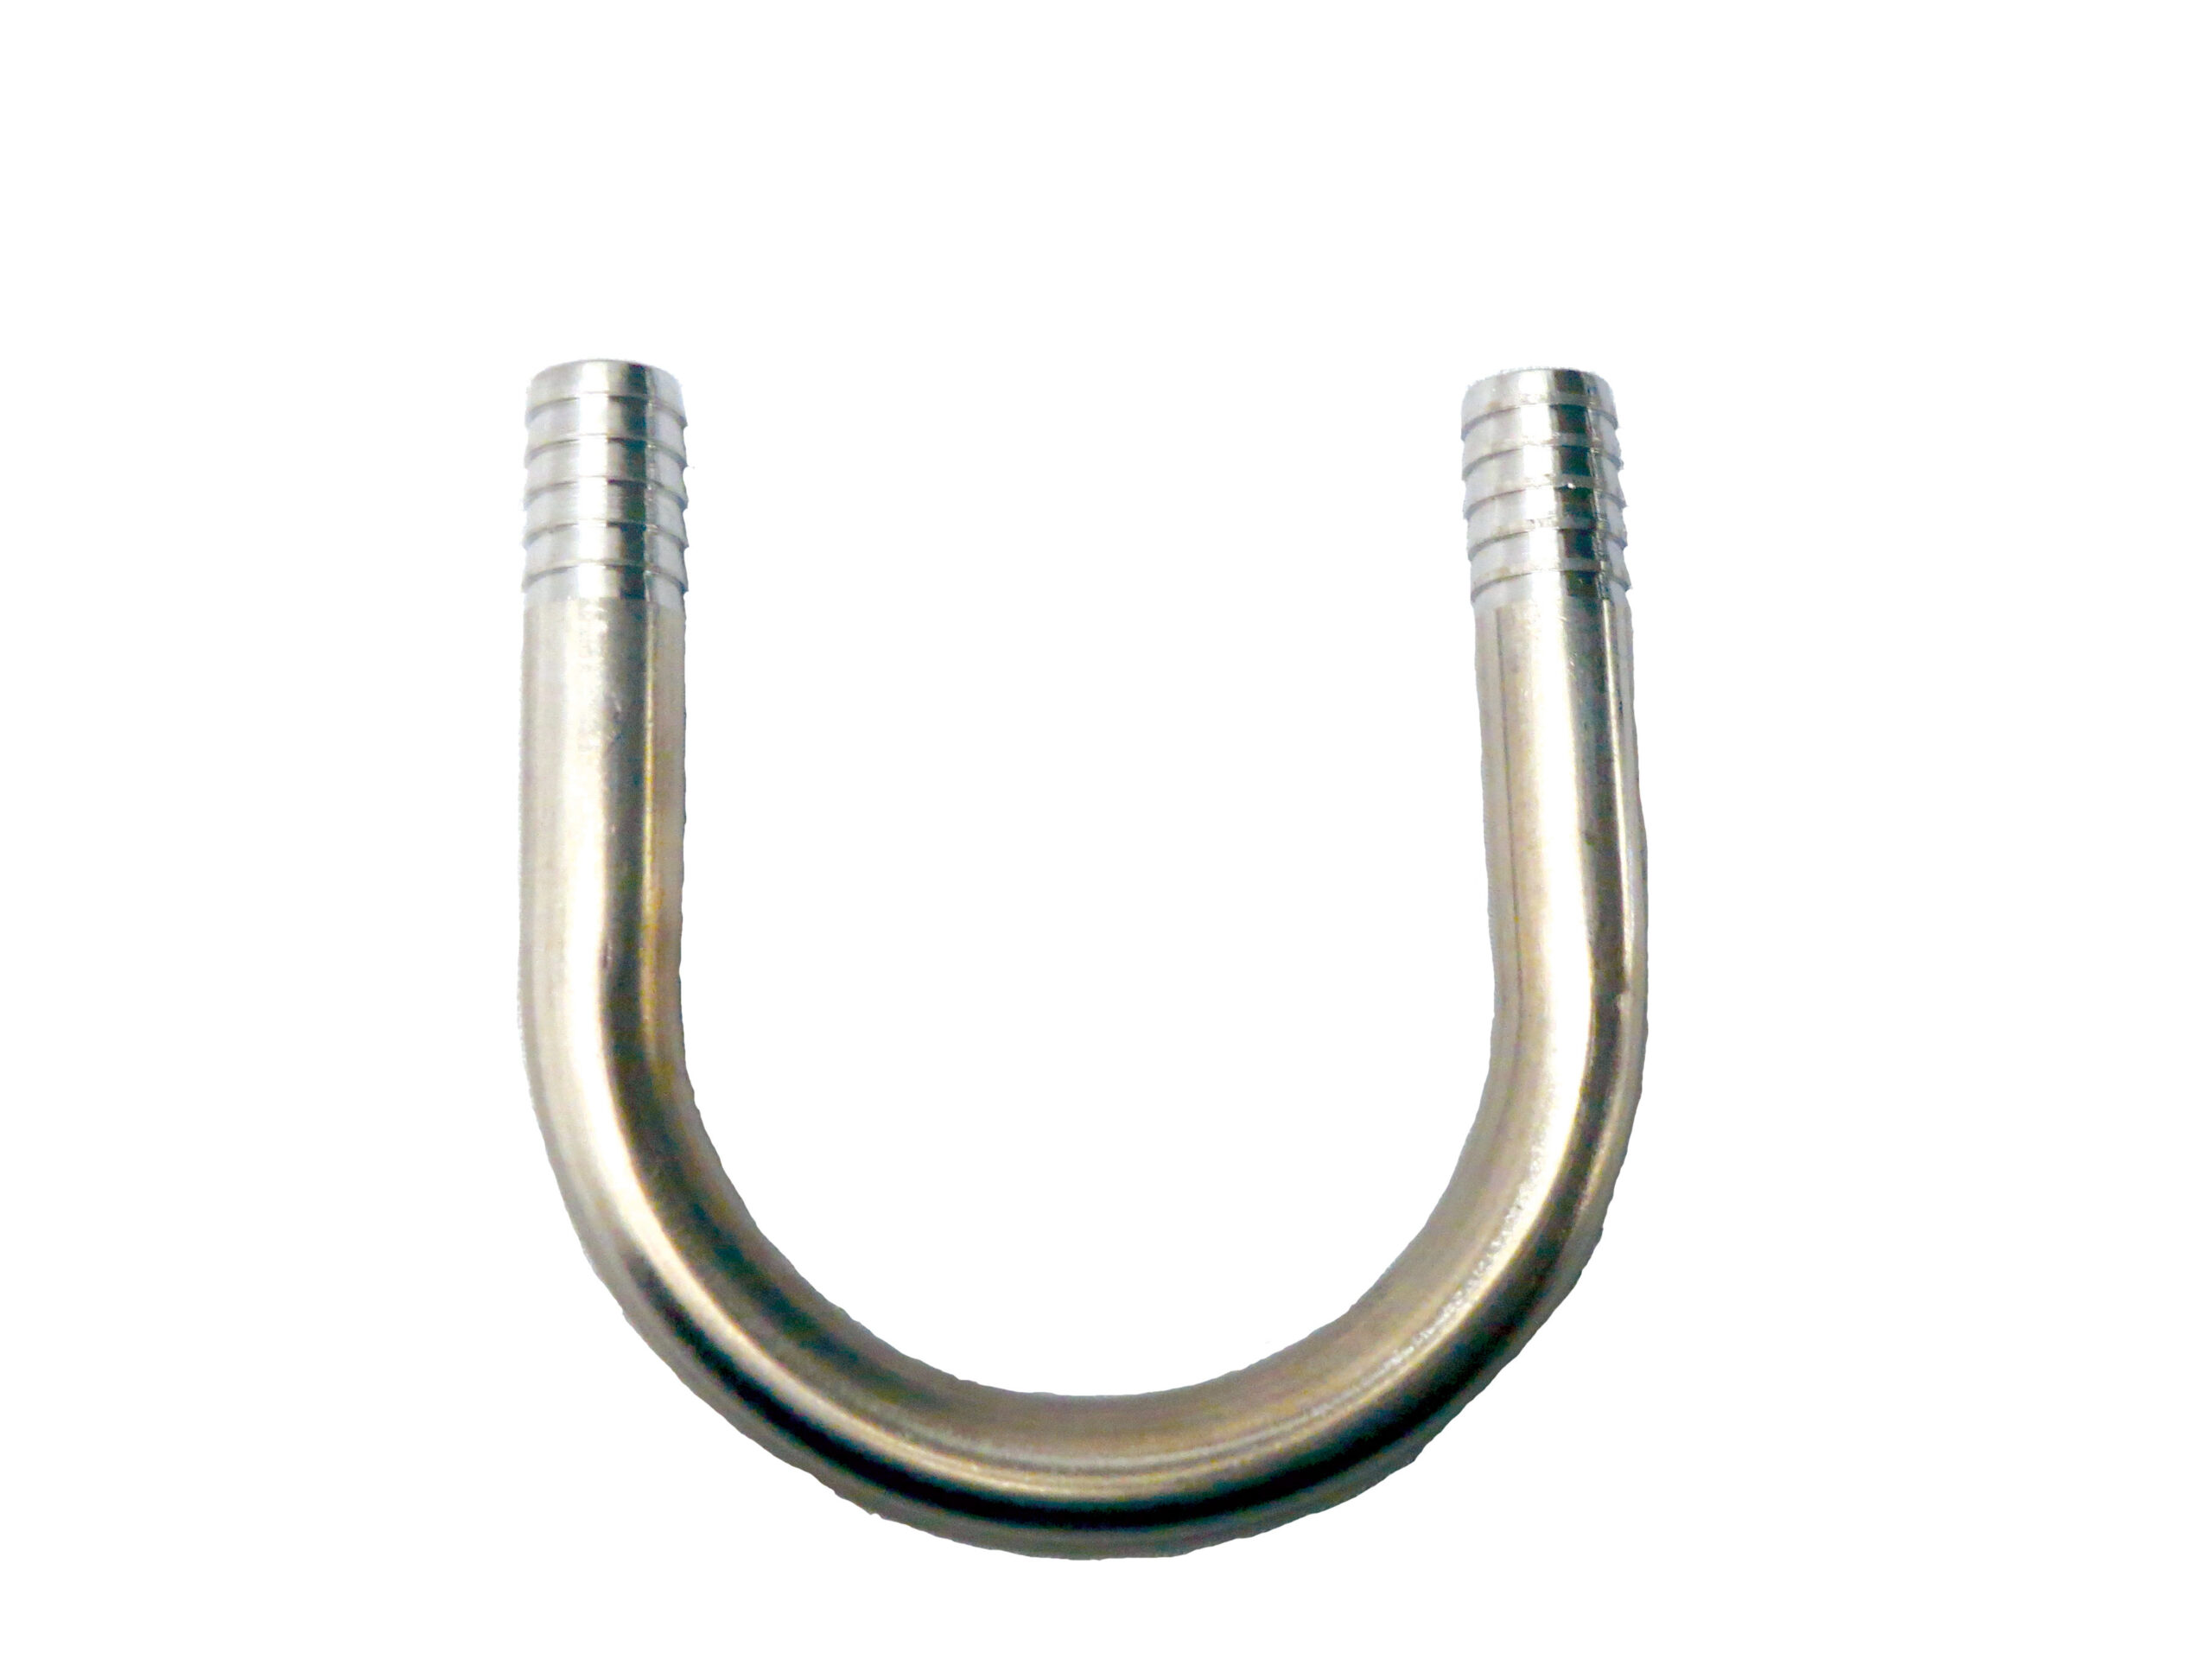 KU Stainless Steel Return with 3/8" Barbs and 2 3/8" On Center Spacing